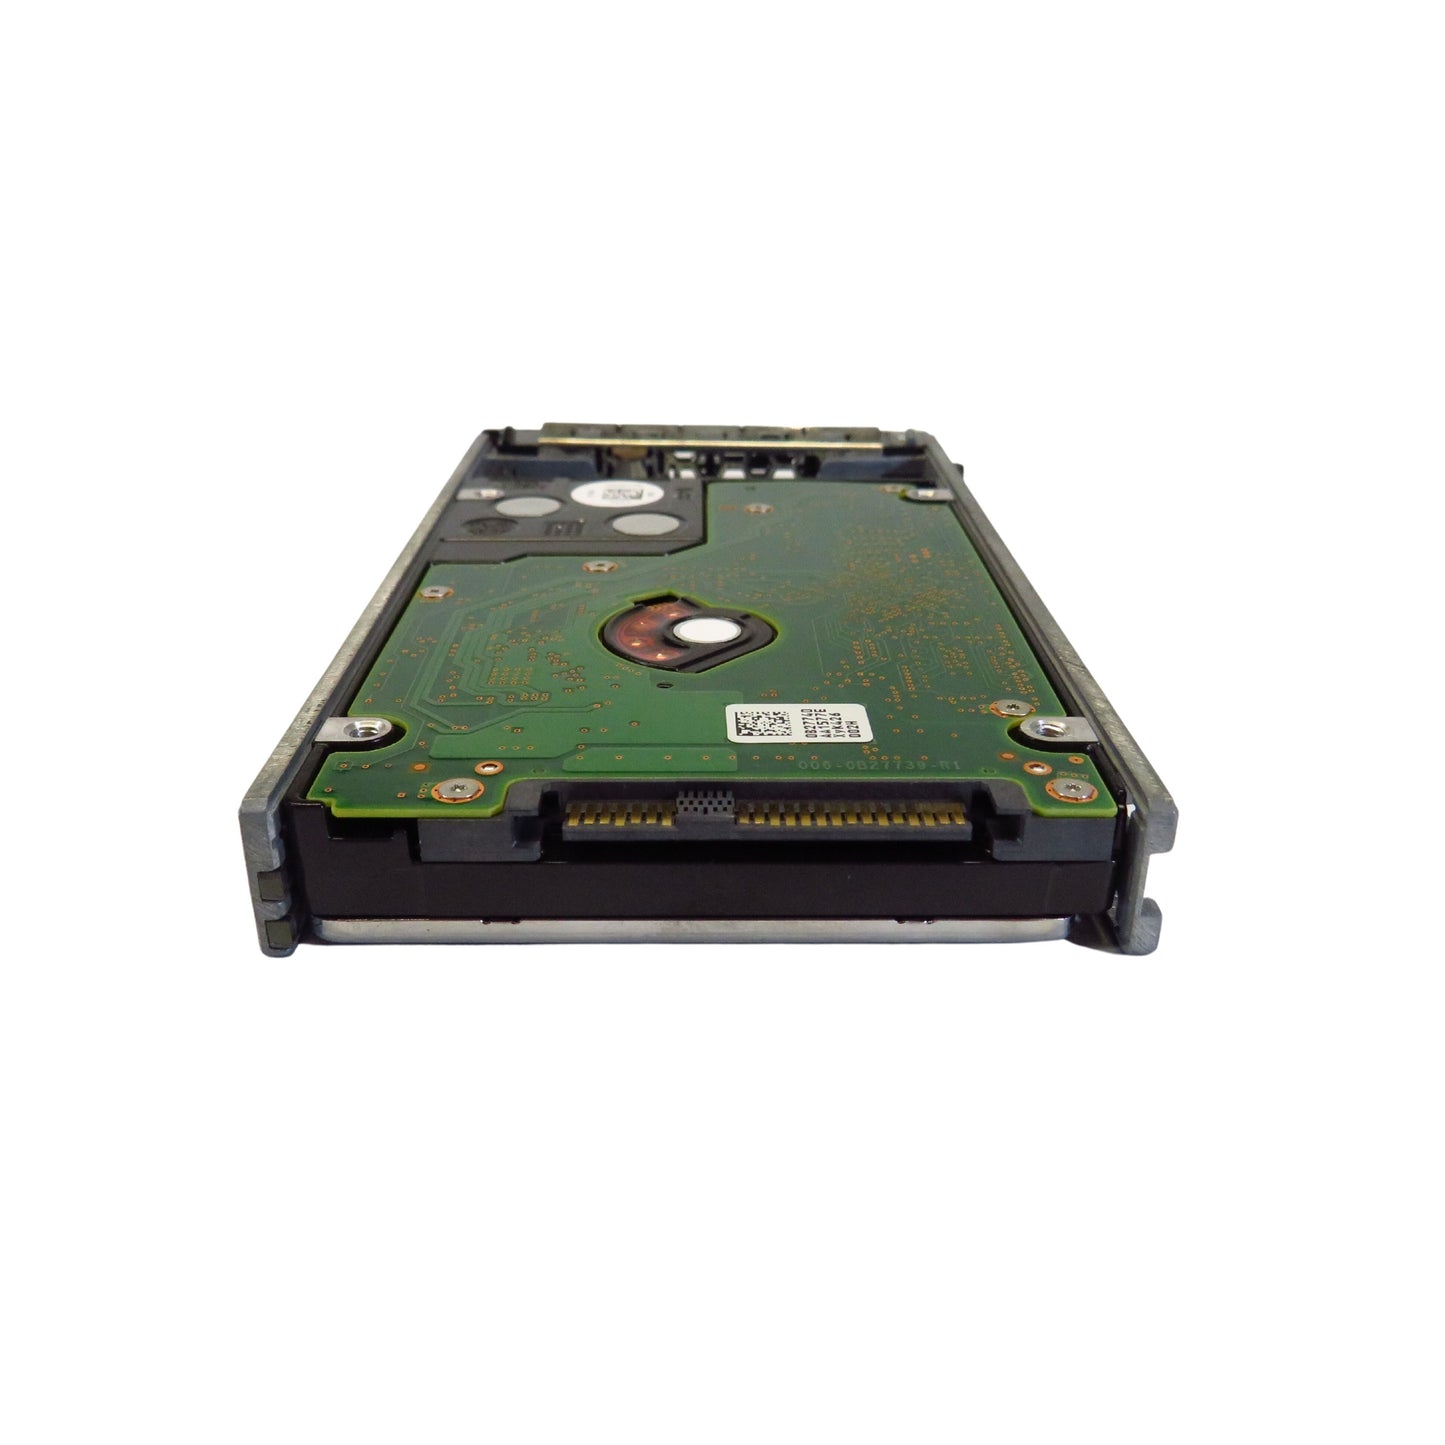 Dell Compellent 1.2TB 2.5" SAS 6Gbps 10K RPM HDD Hard Drive (Refurbished)